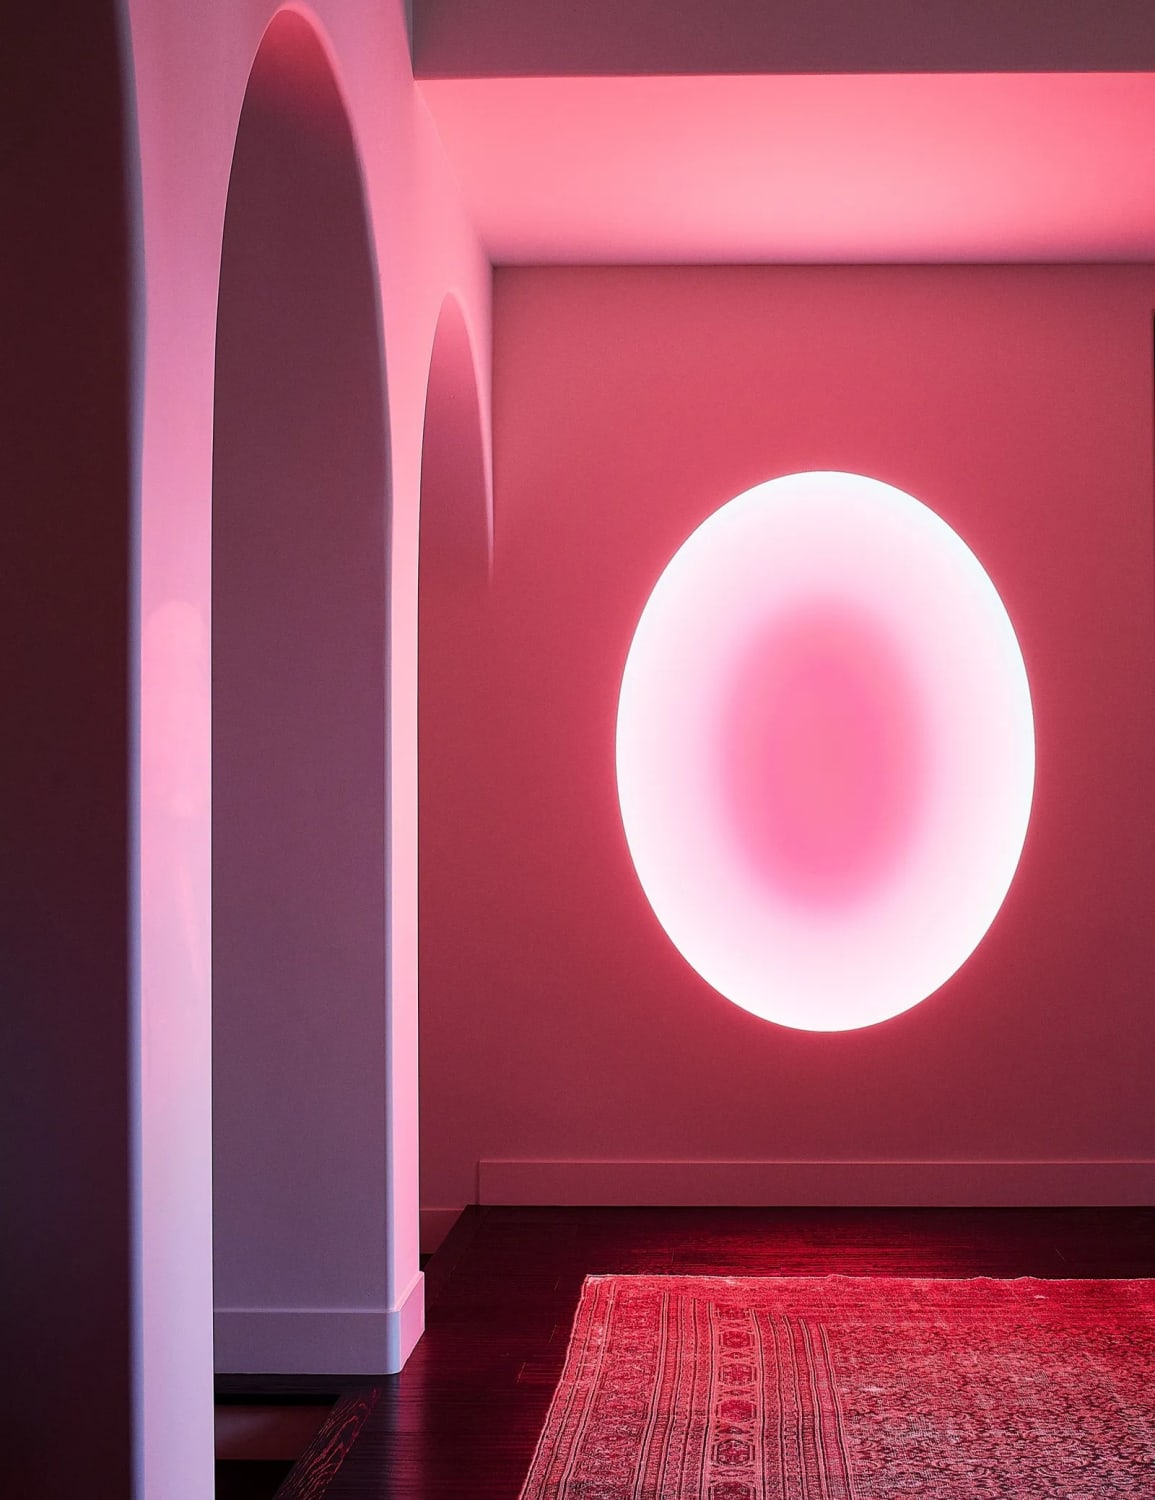 James Turrell installation in Kendall Jenner's LA home